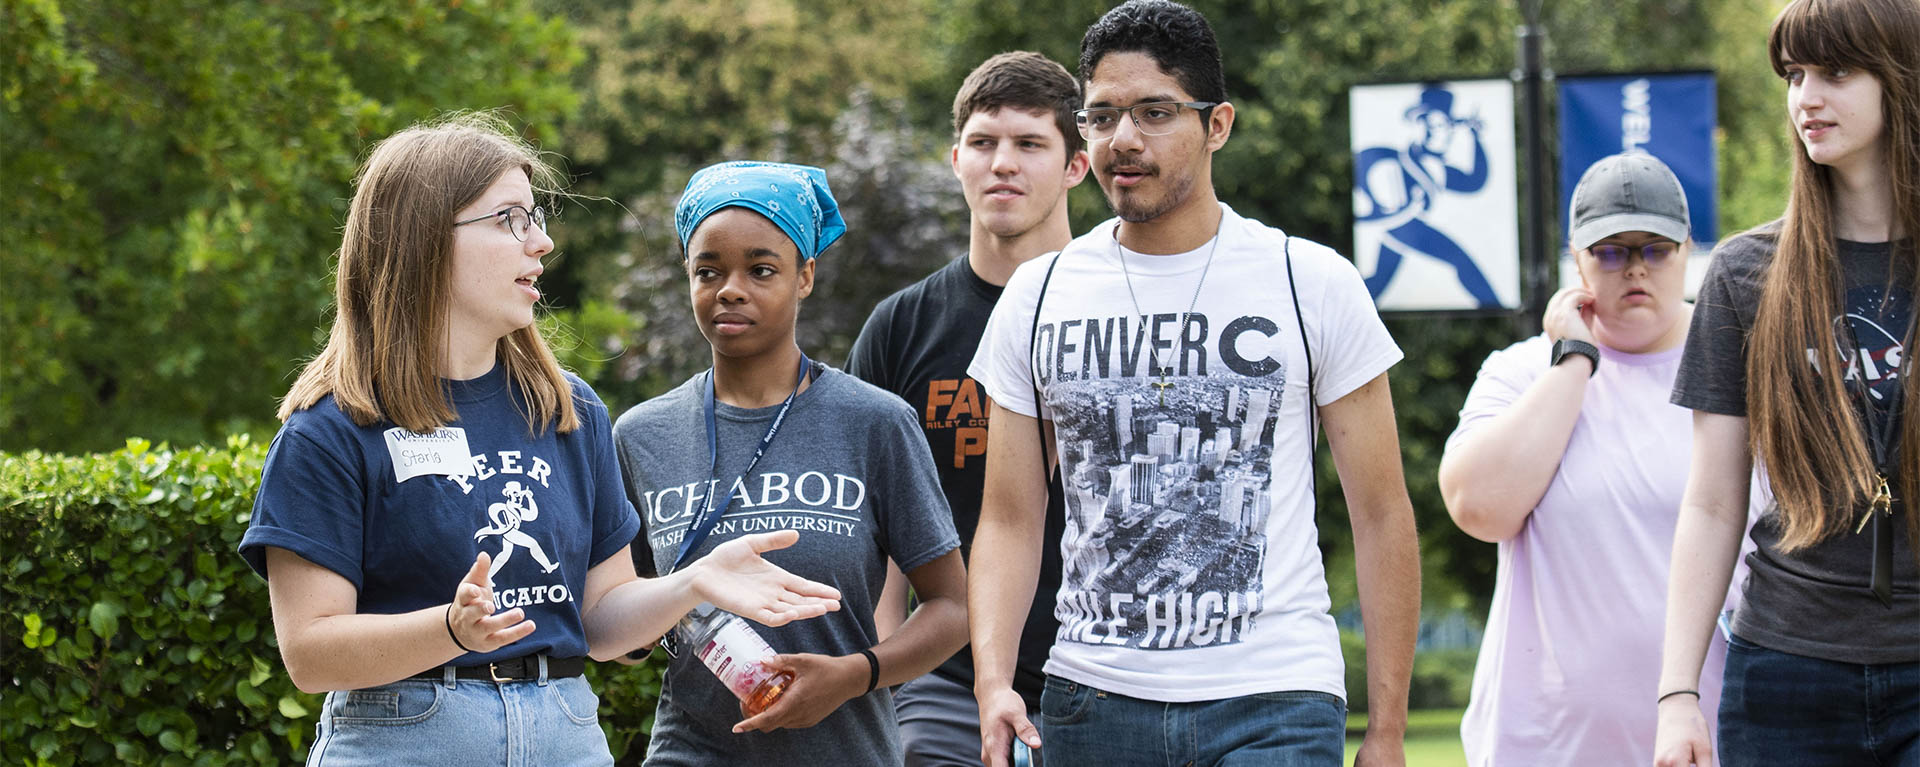 A student wearing a name tag leads a tour group of other students around campus.